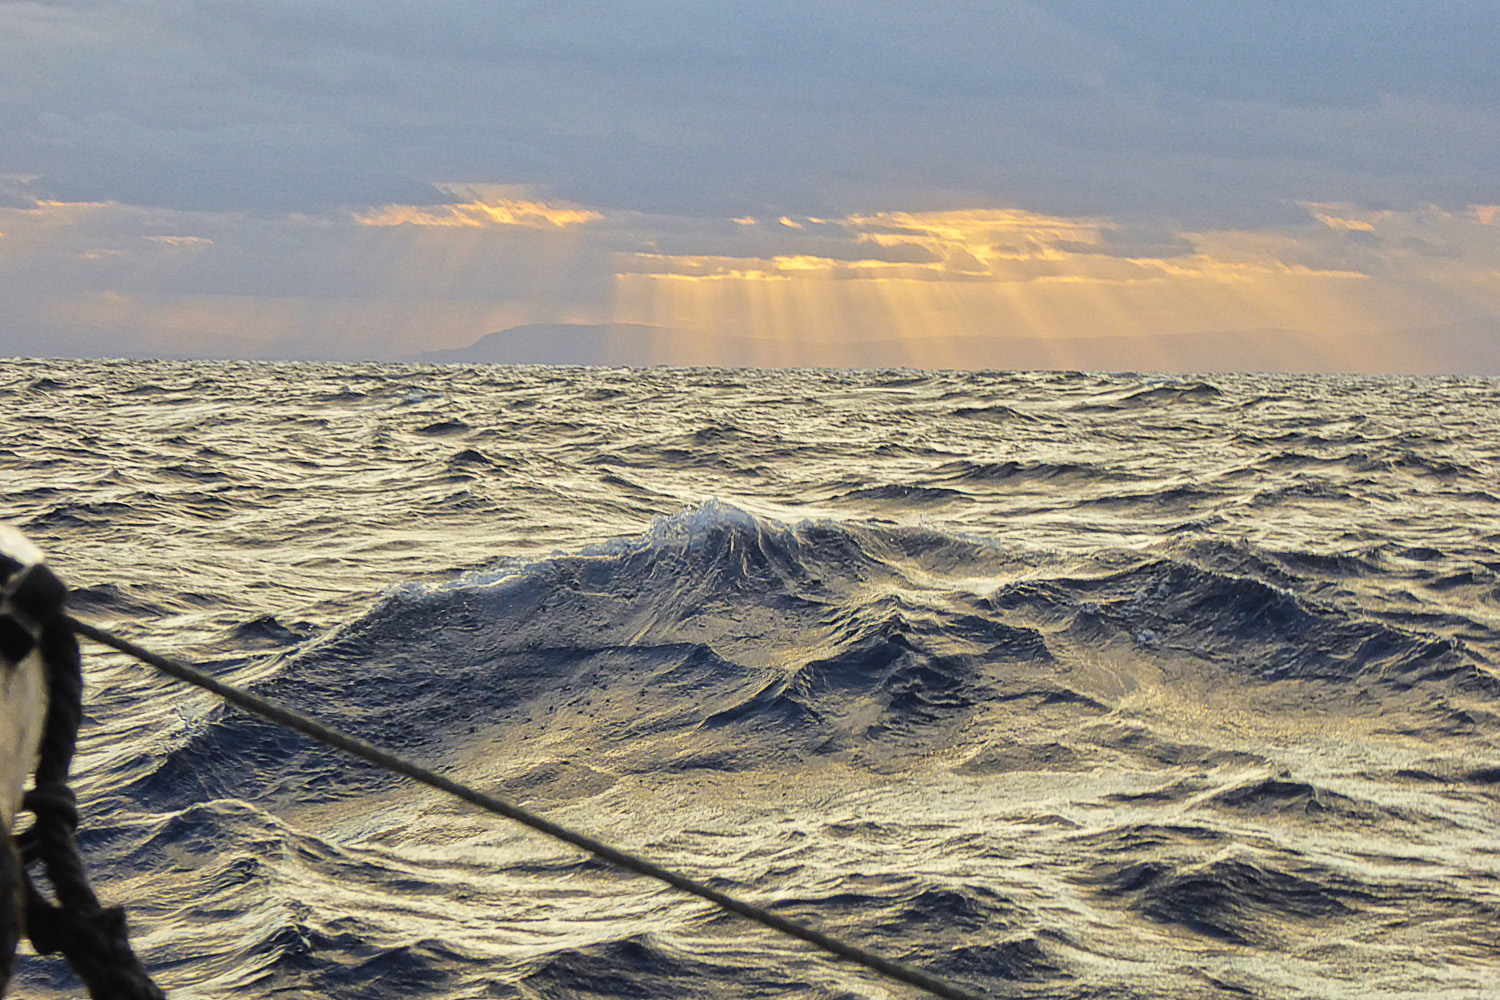 Sunlight gilded choppy waters as the Phoenica crossed the 59th meridian west into the Eastern Caribbean Islands. 